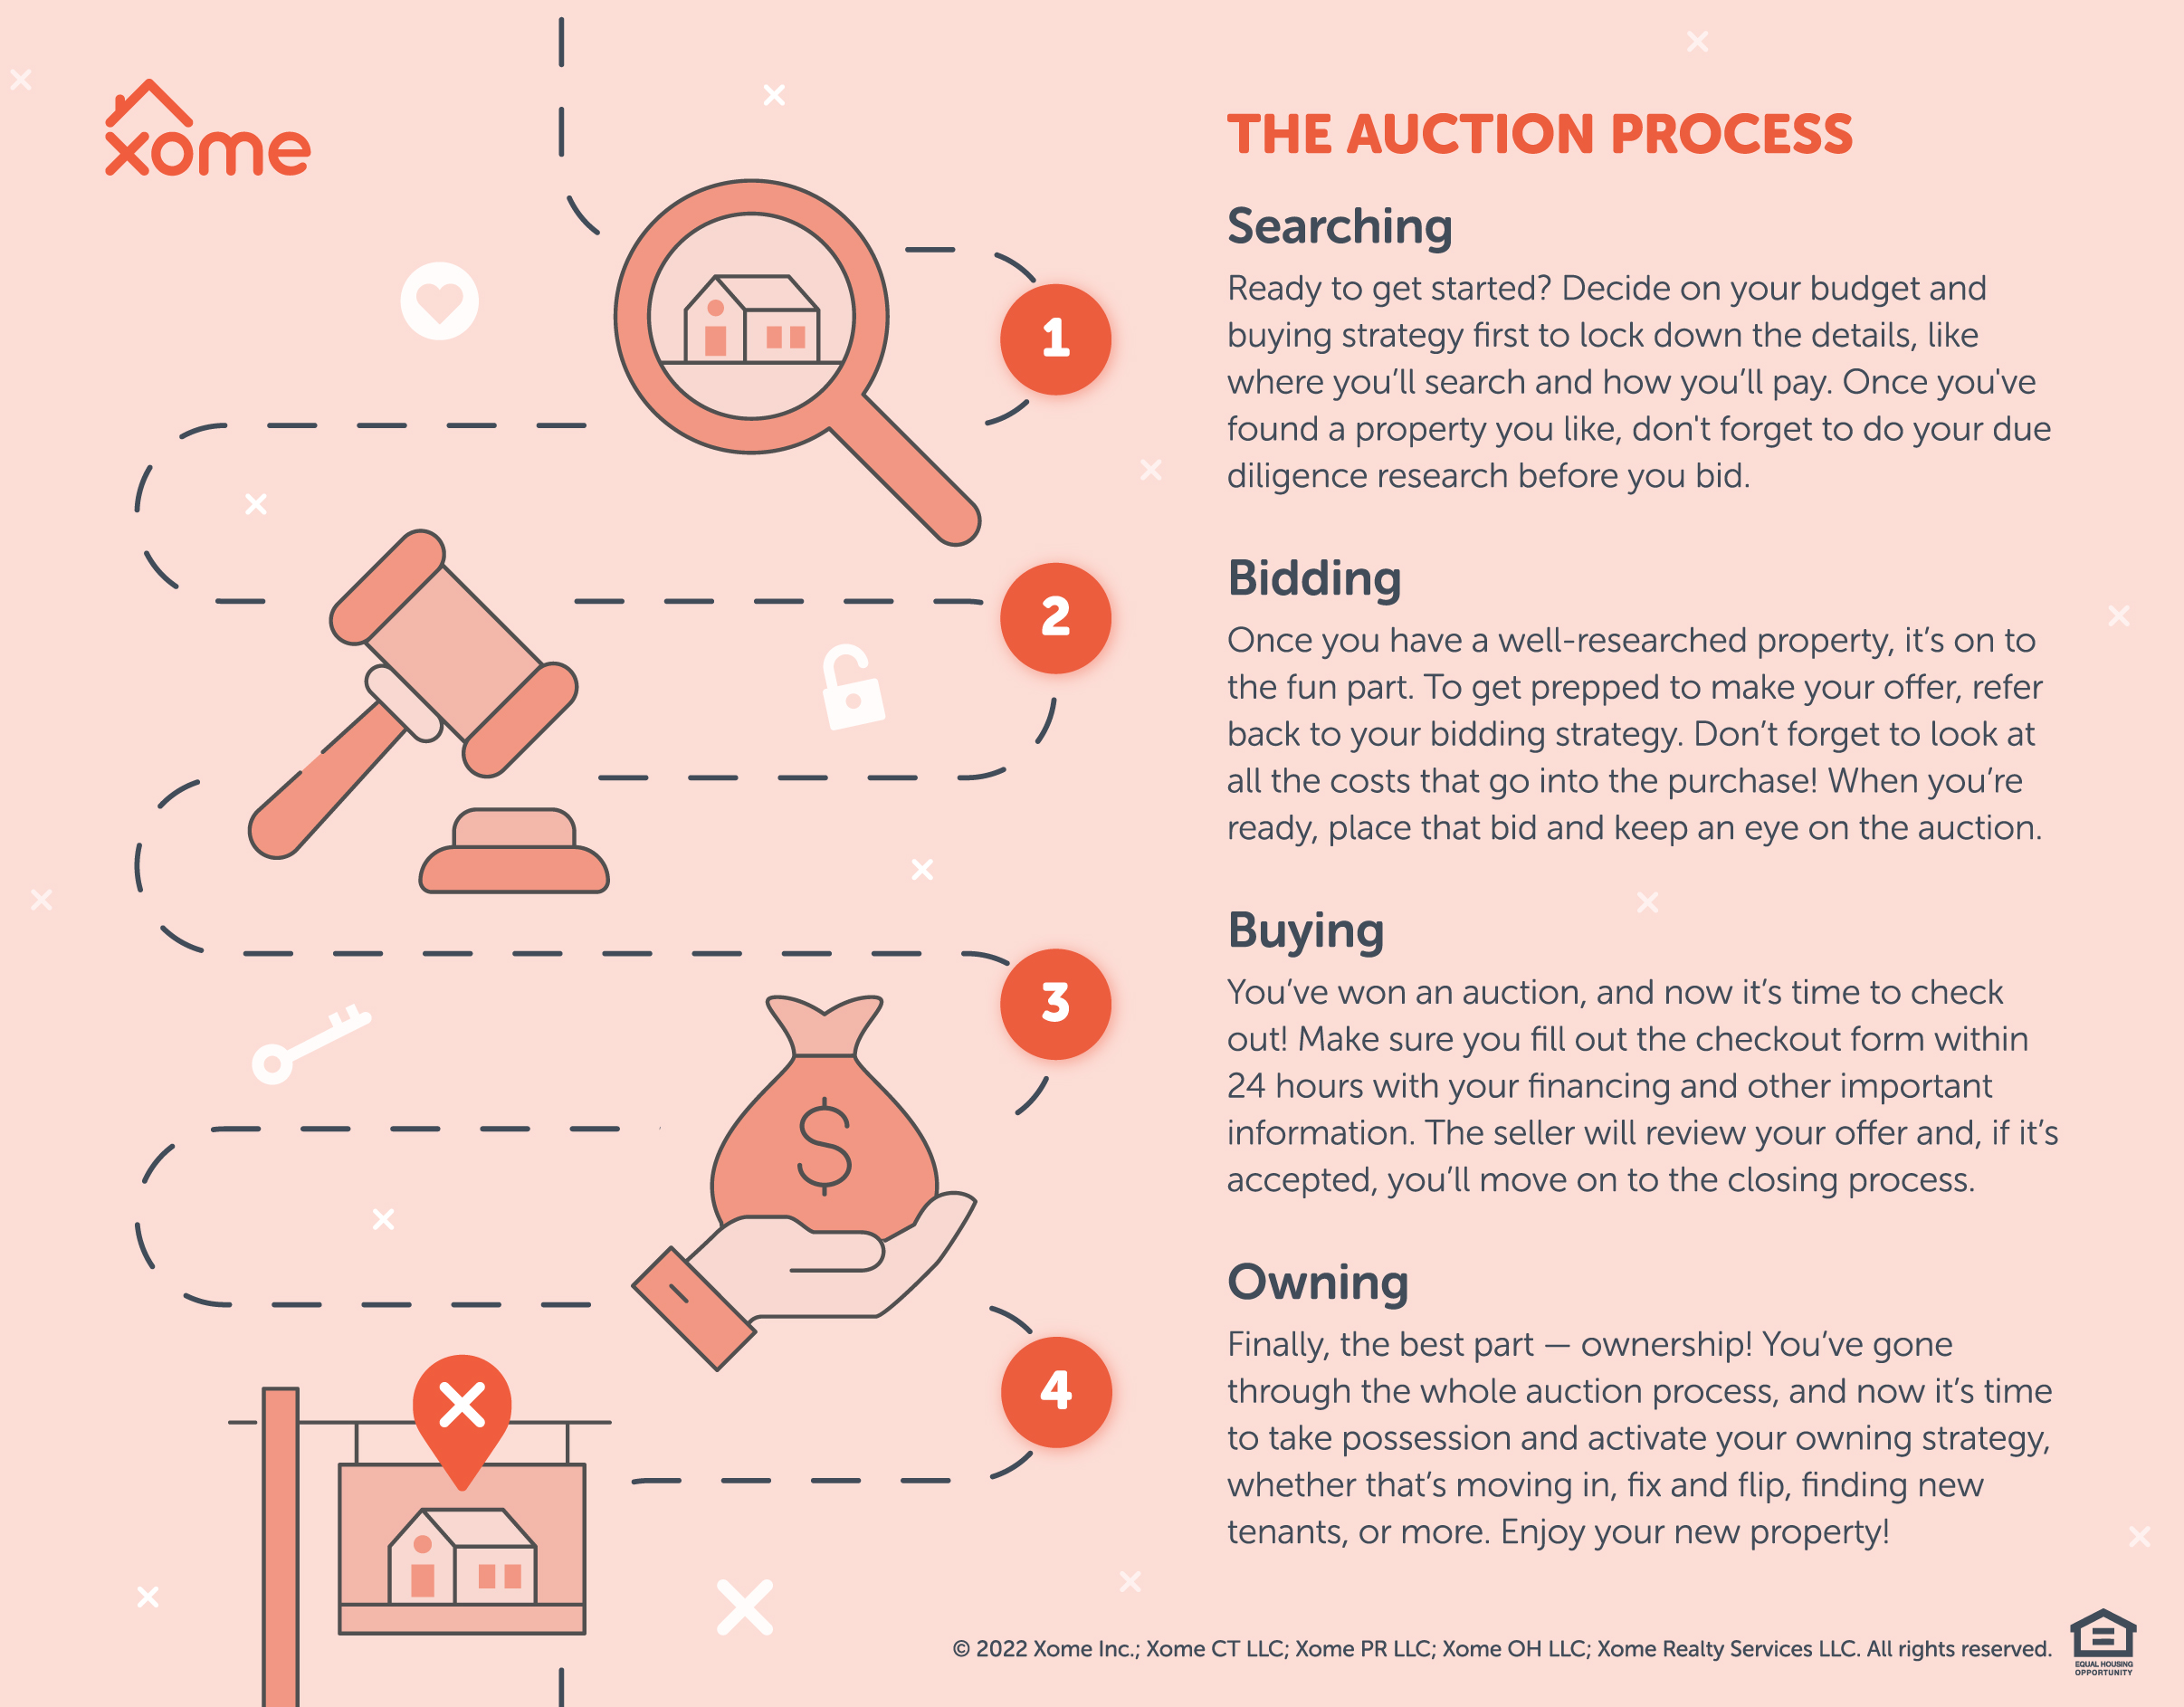 Xome_Auction_Process_Infographic.jpg